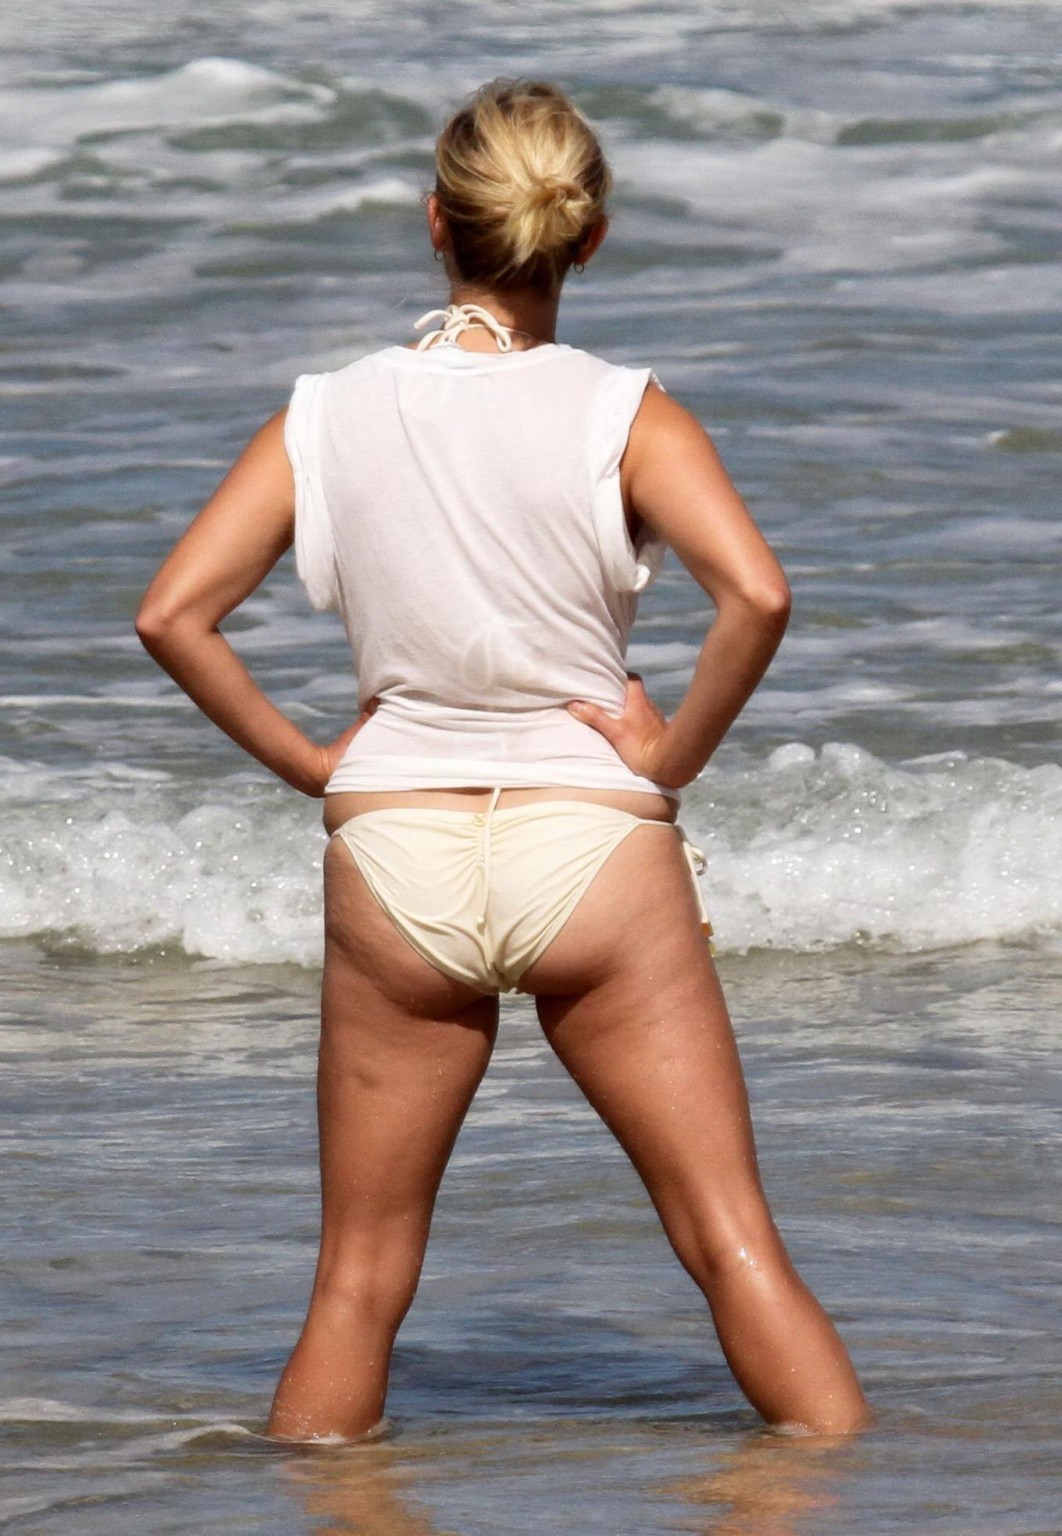 Reese Witherspoon shows off her ass while surfing in Hawaii #75291133